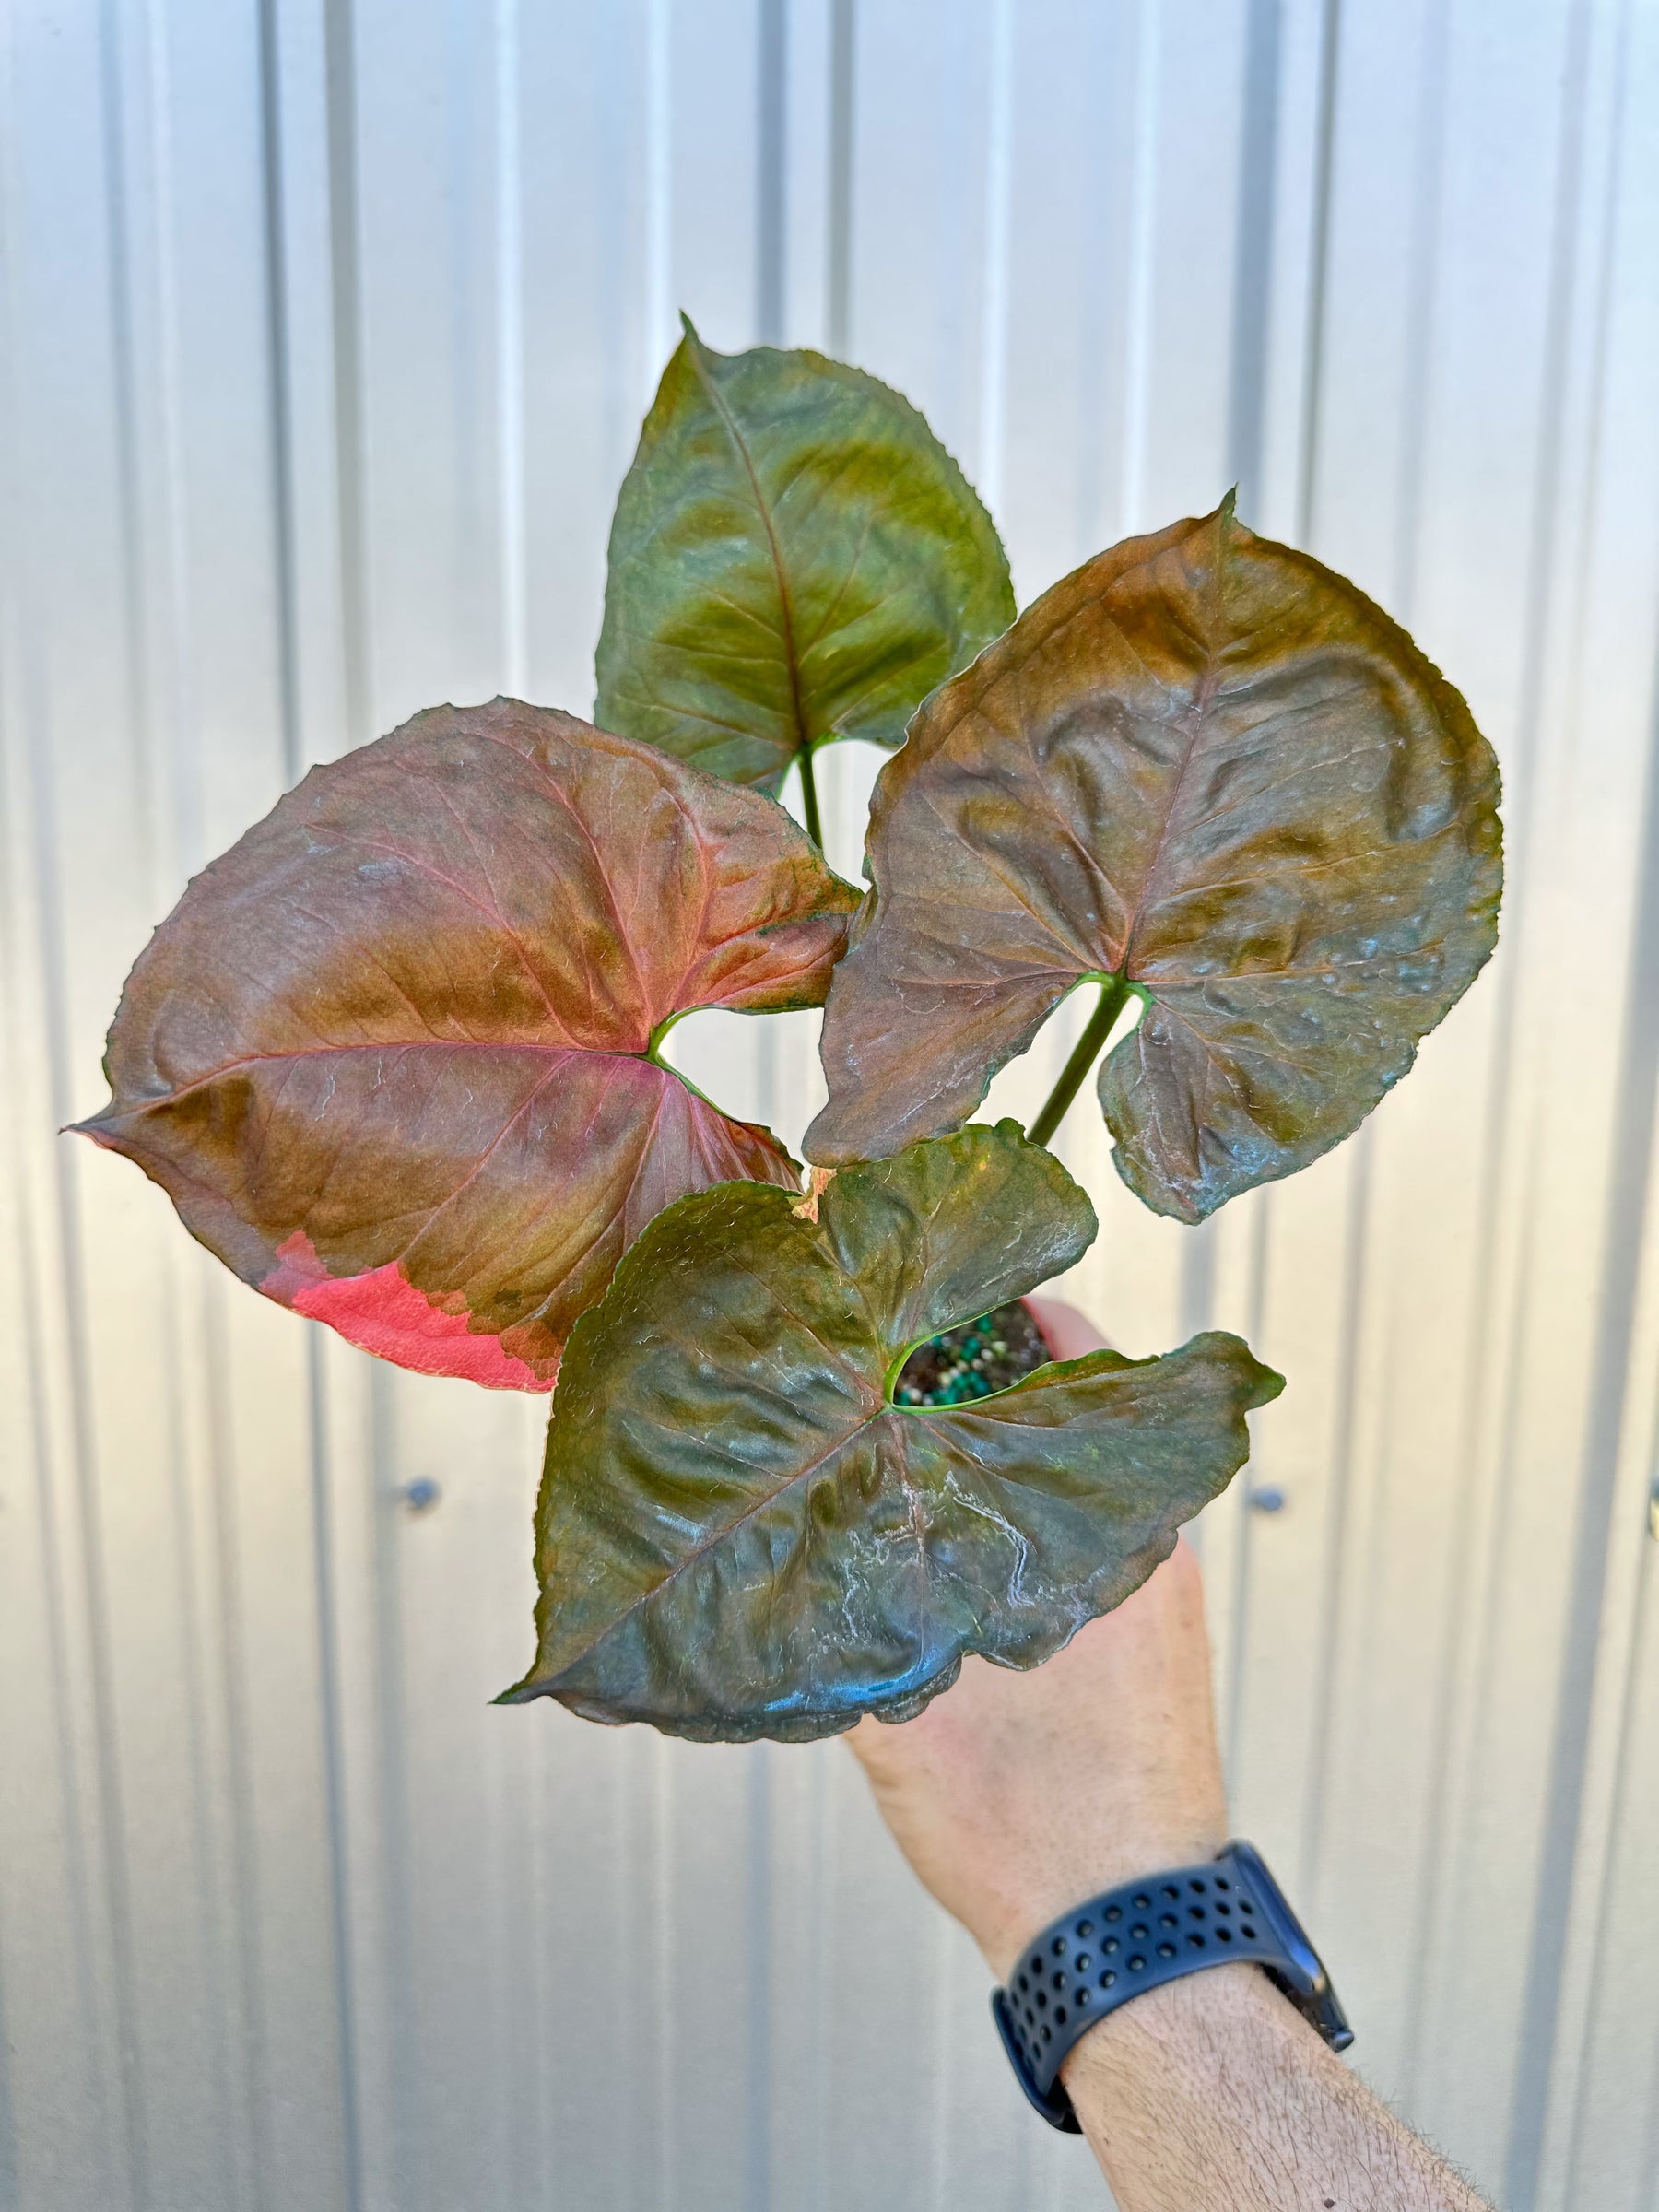 4" Syngonium 'Strawberry Ice' (low color)